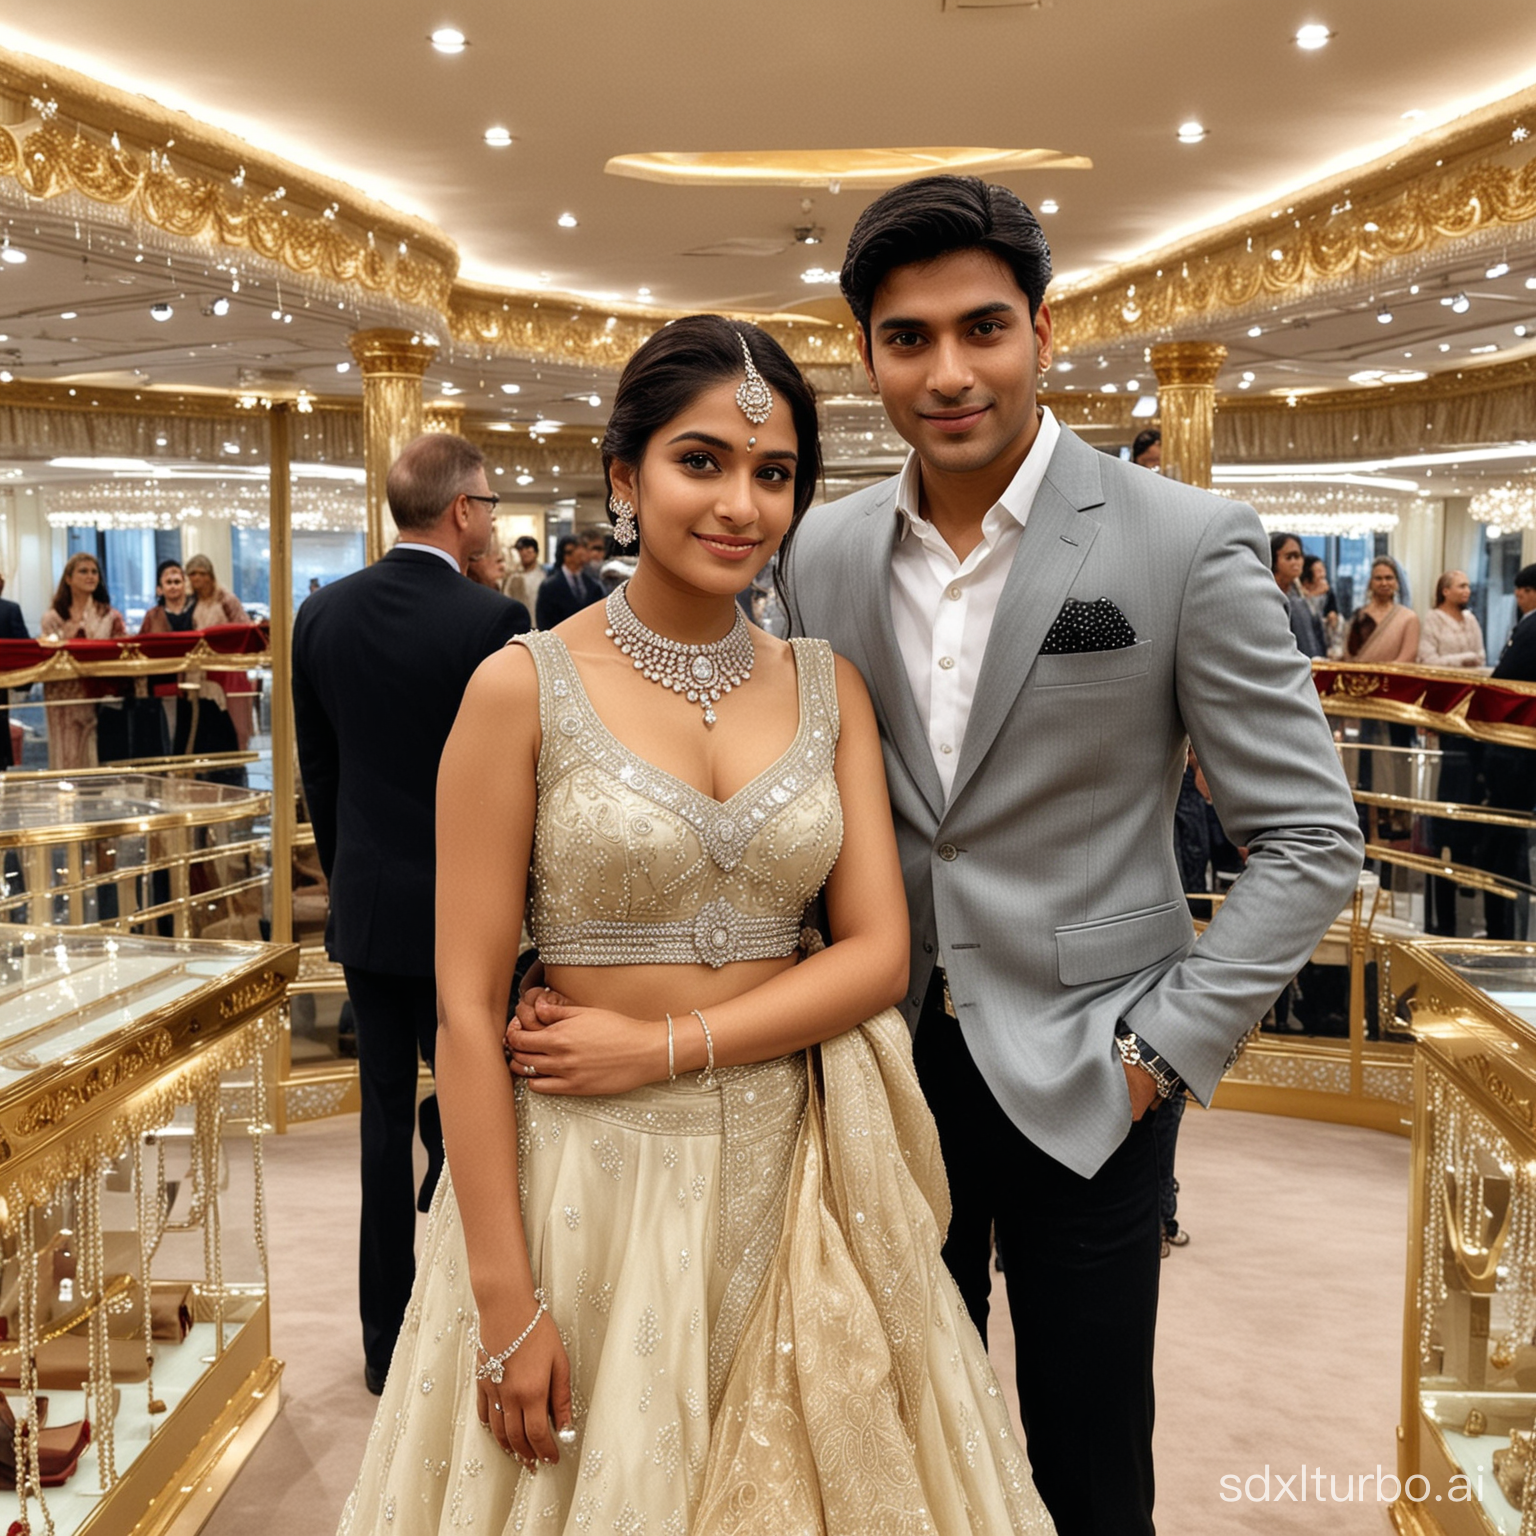 Young Indian beautiful lady and handsome man standing side by side in a diamond necklace jewellery show room grand inside a grand cruice ship
